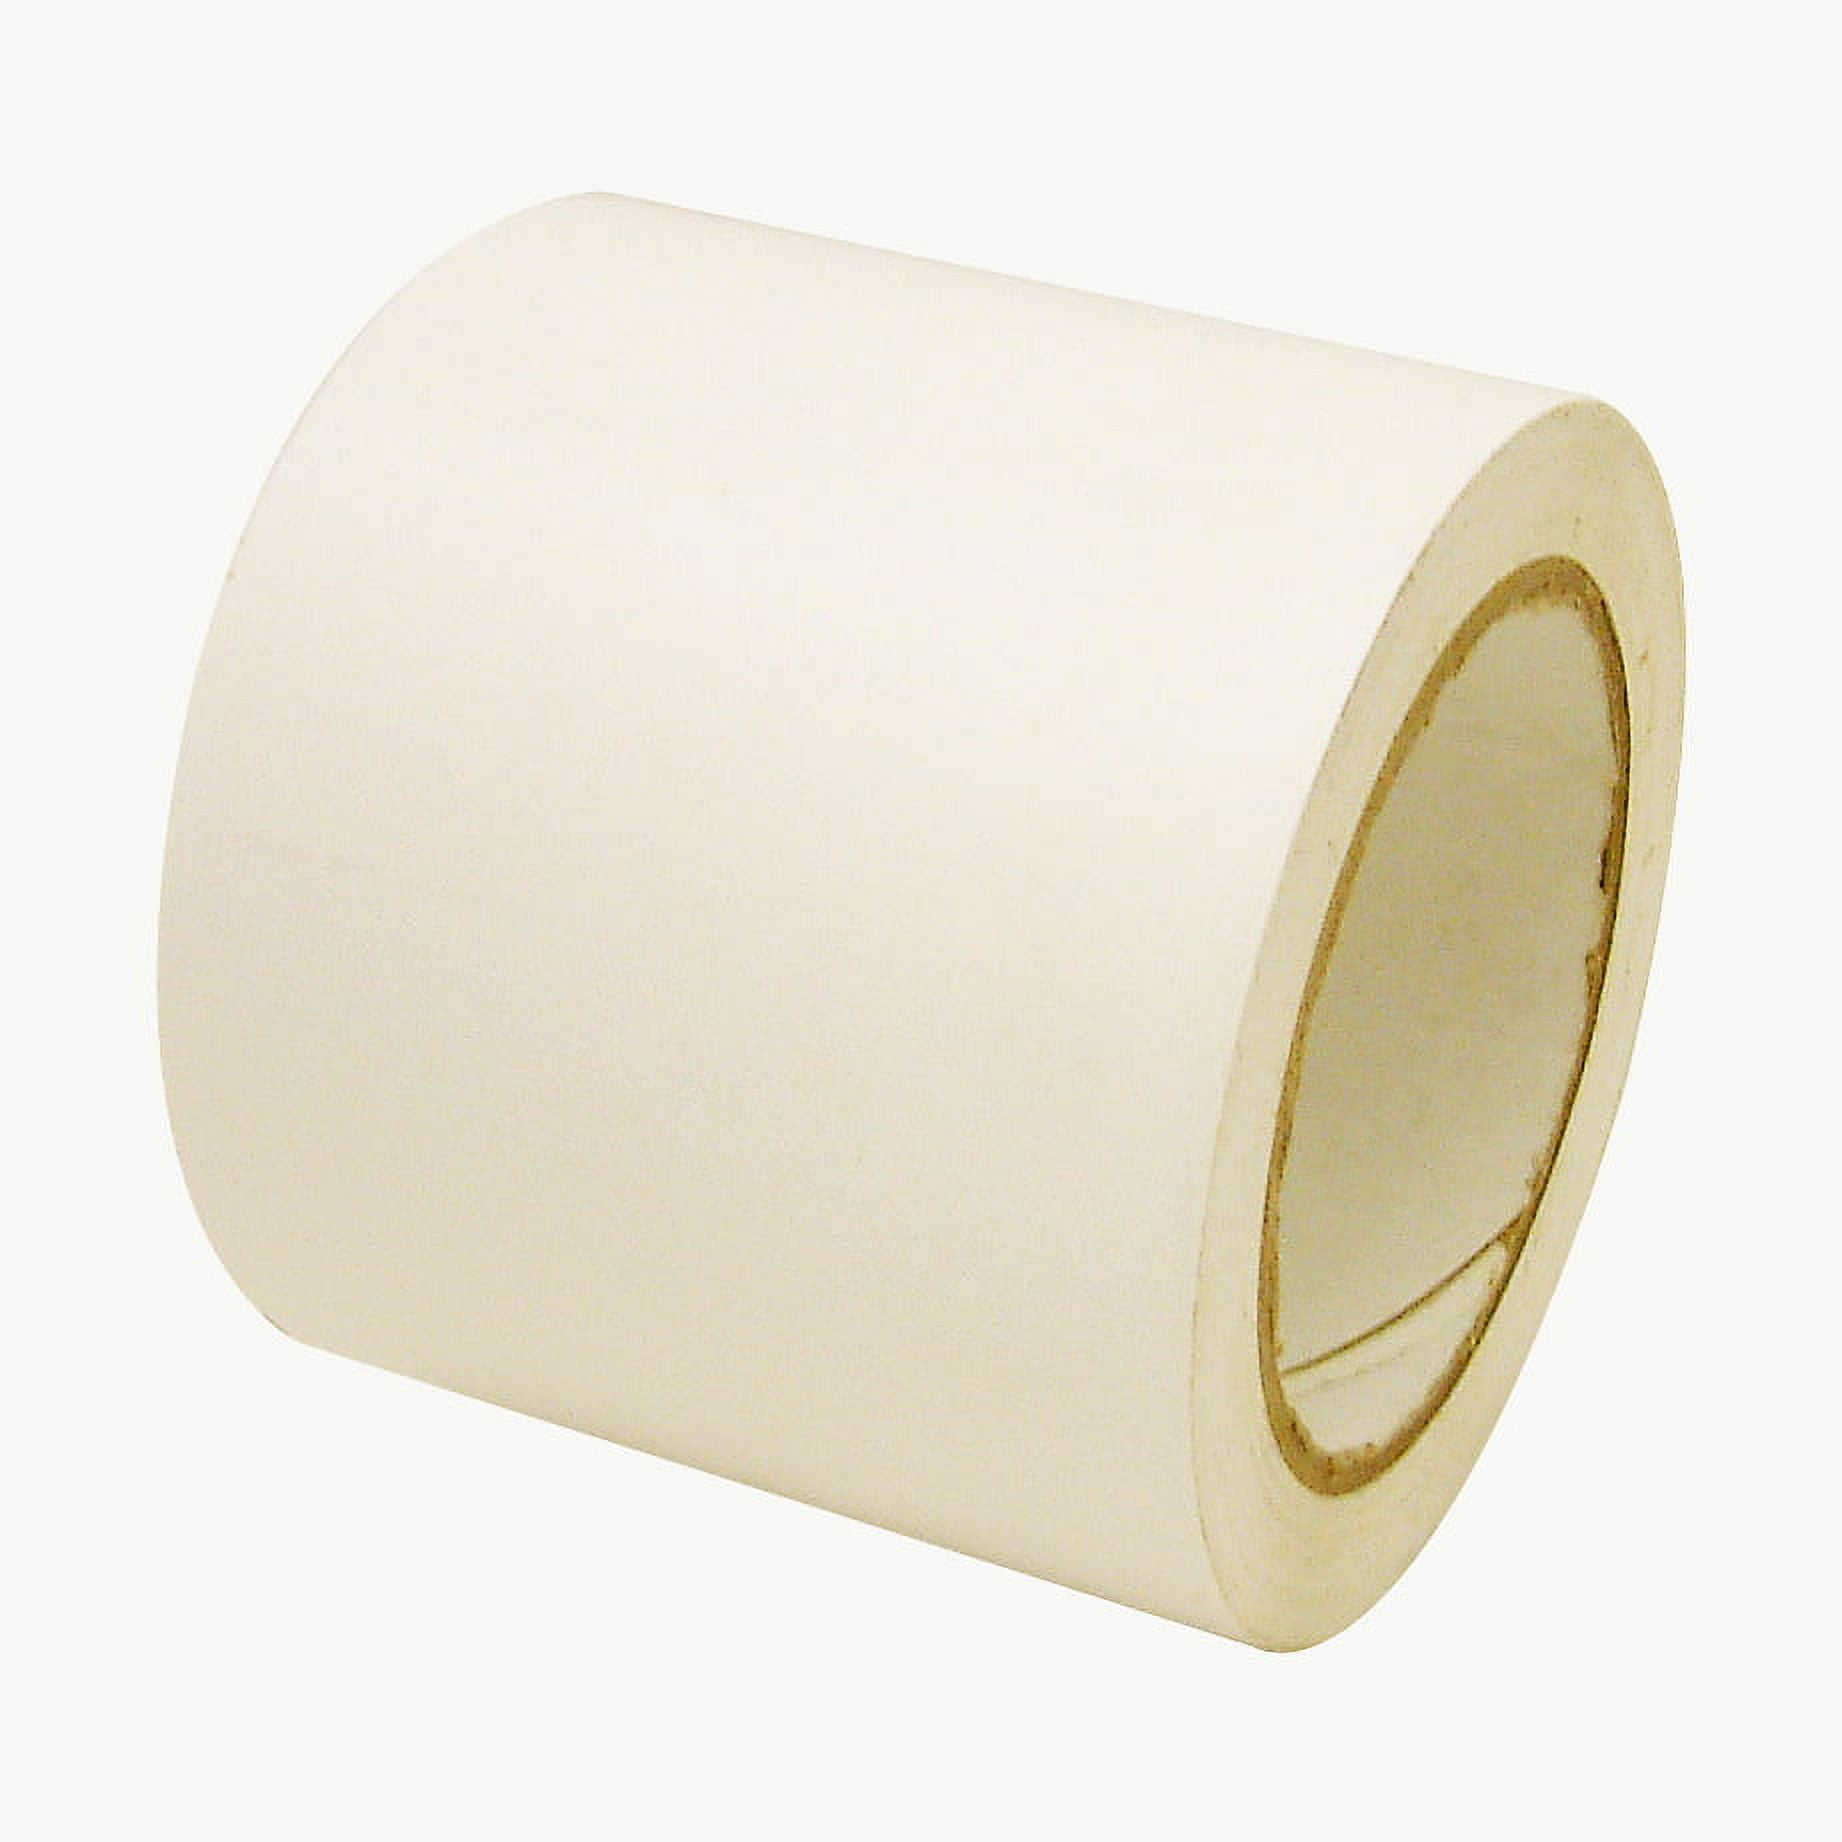 WOD Tape White Duct Tape 1.42 in x 60 yd. Strong Waterproof DTC10